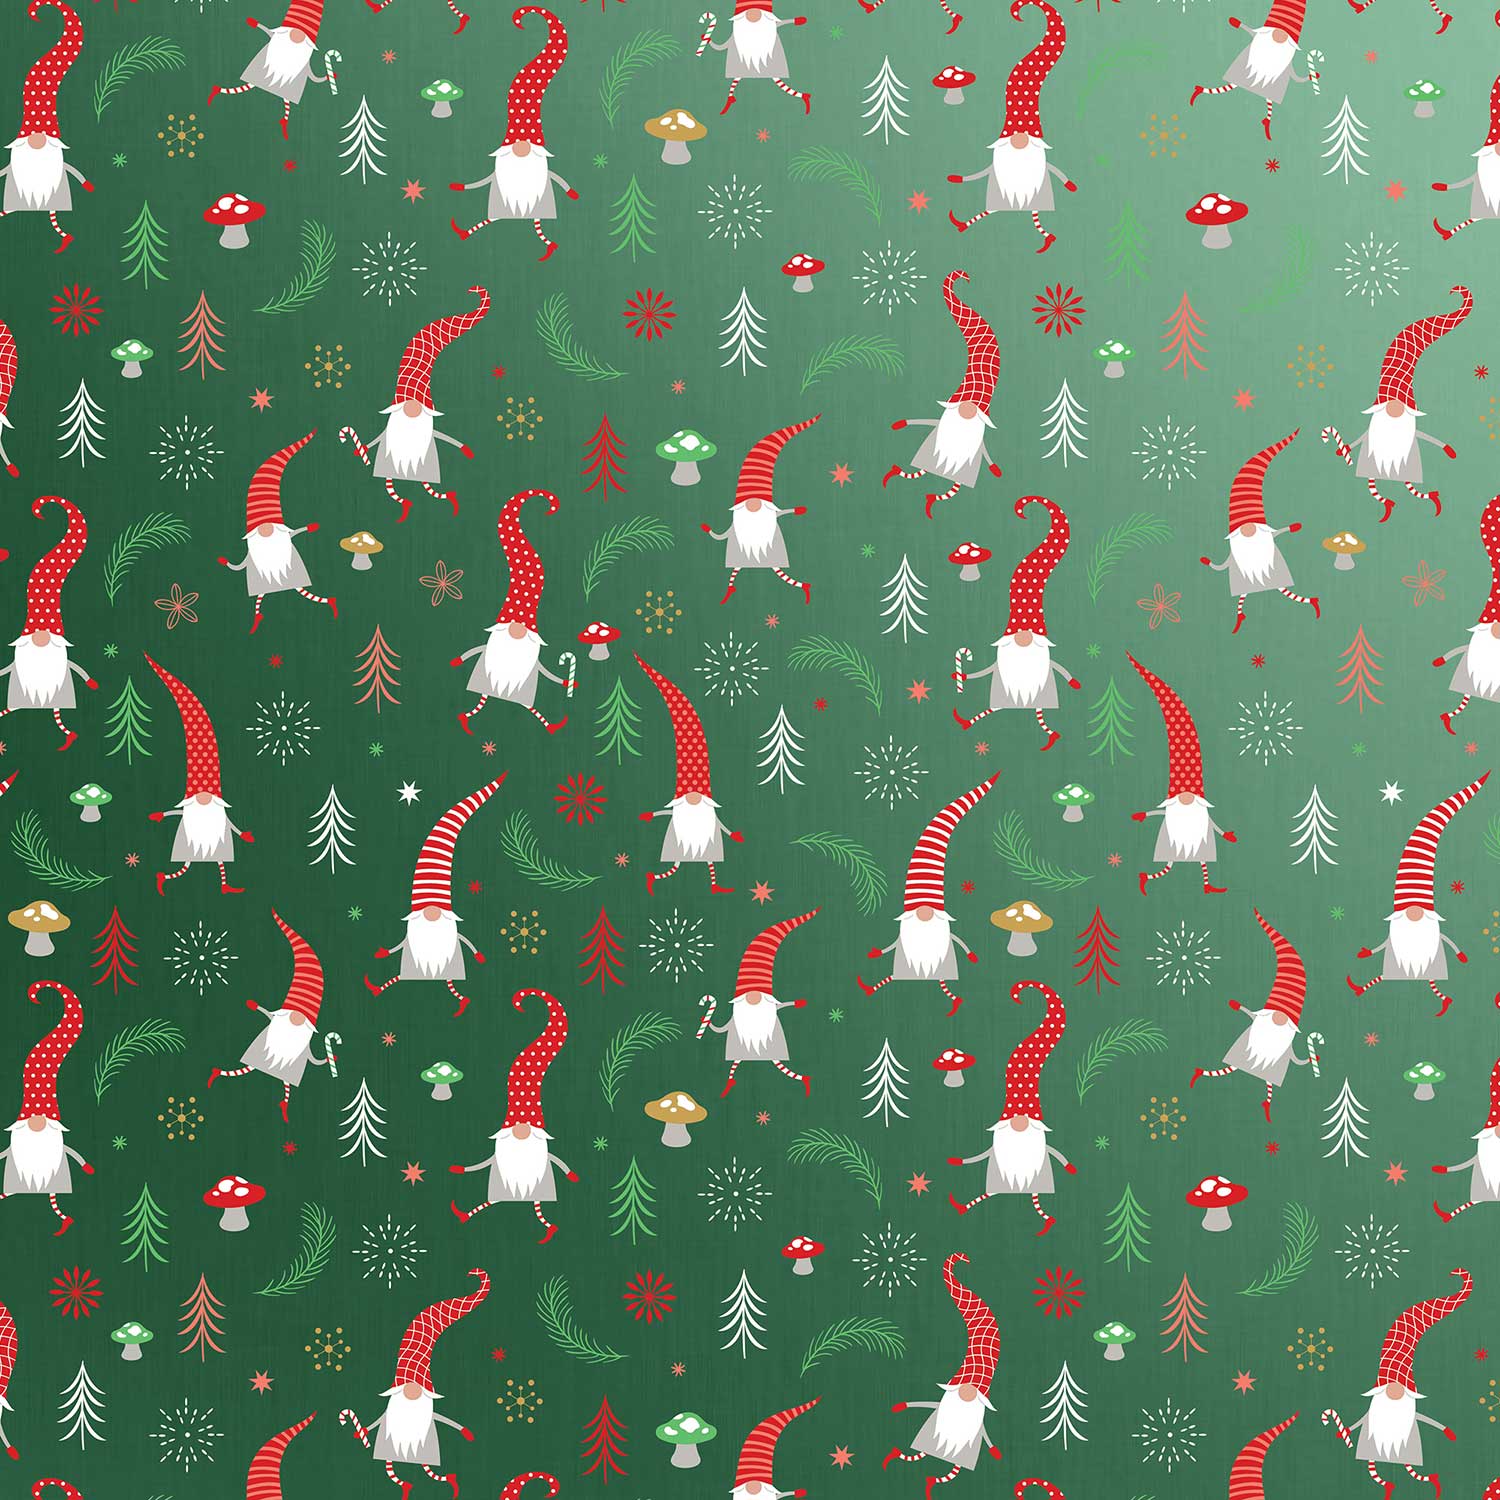 XB621a Gnome Christmas Gift Wrapping Paper Swatch 